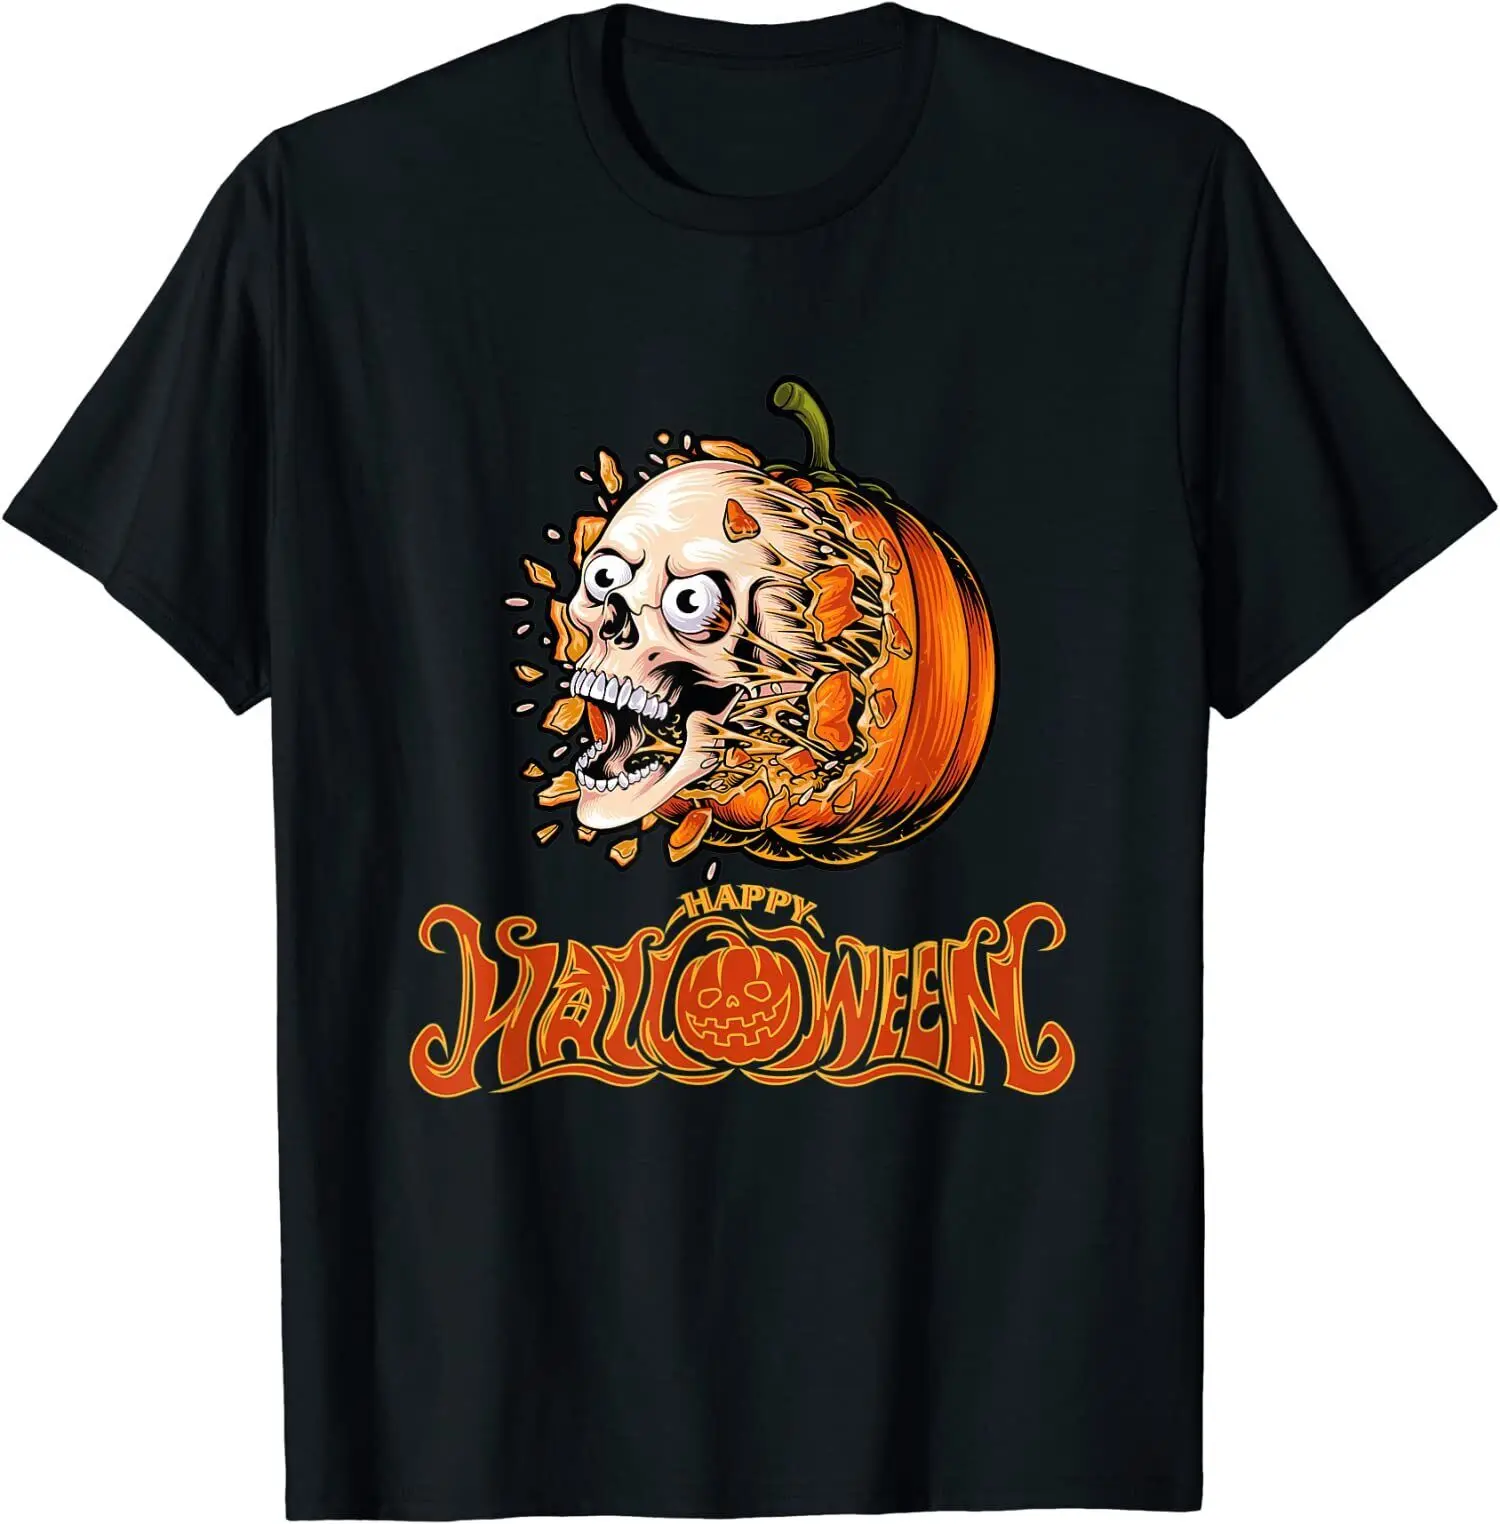 

Happy Halloween Pumpkin And A Skull Hipster Printed T Shirt Japanese Fashion Men T-shirt Short Sleeve Tops Gothic Funny Tees